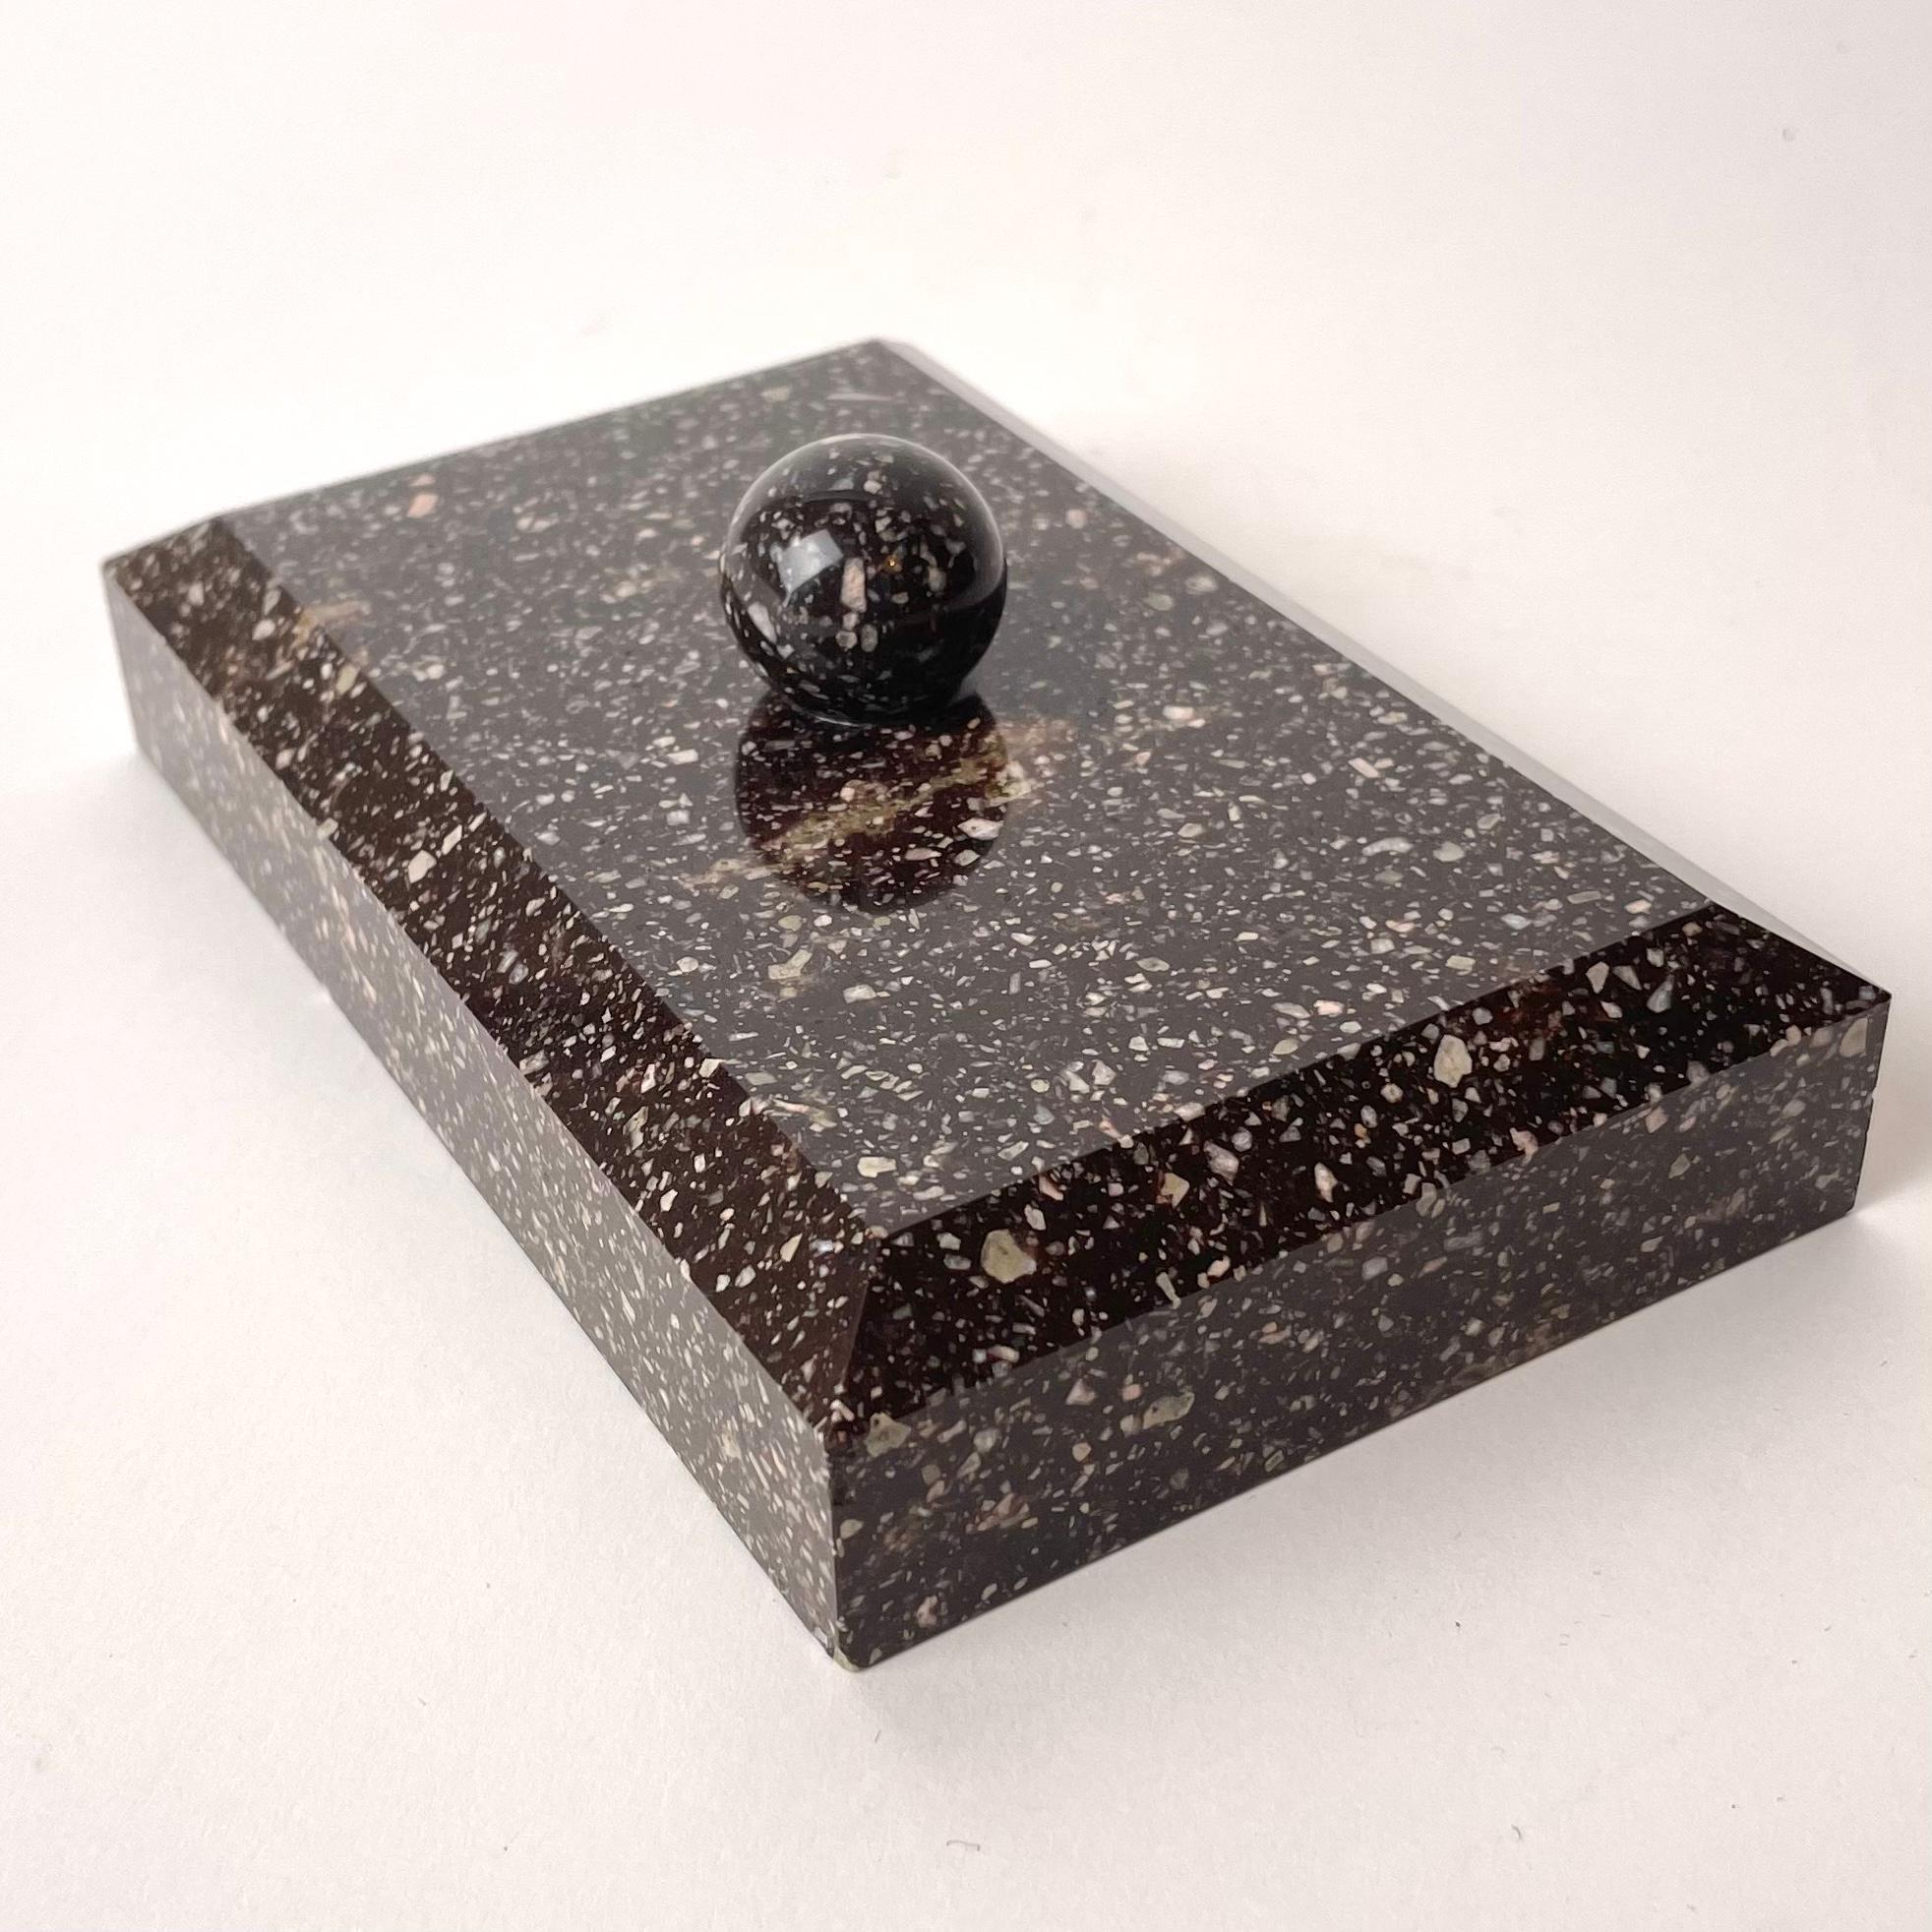 Elegant and Rare Paperweight in beautiful porphyry. Made in Sweden during the early 19th Century. This hard and sensitive rock has been polished with high precision.

Wear consistent with age and use.

